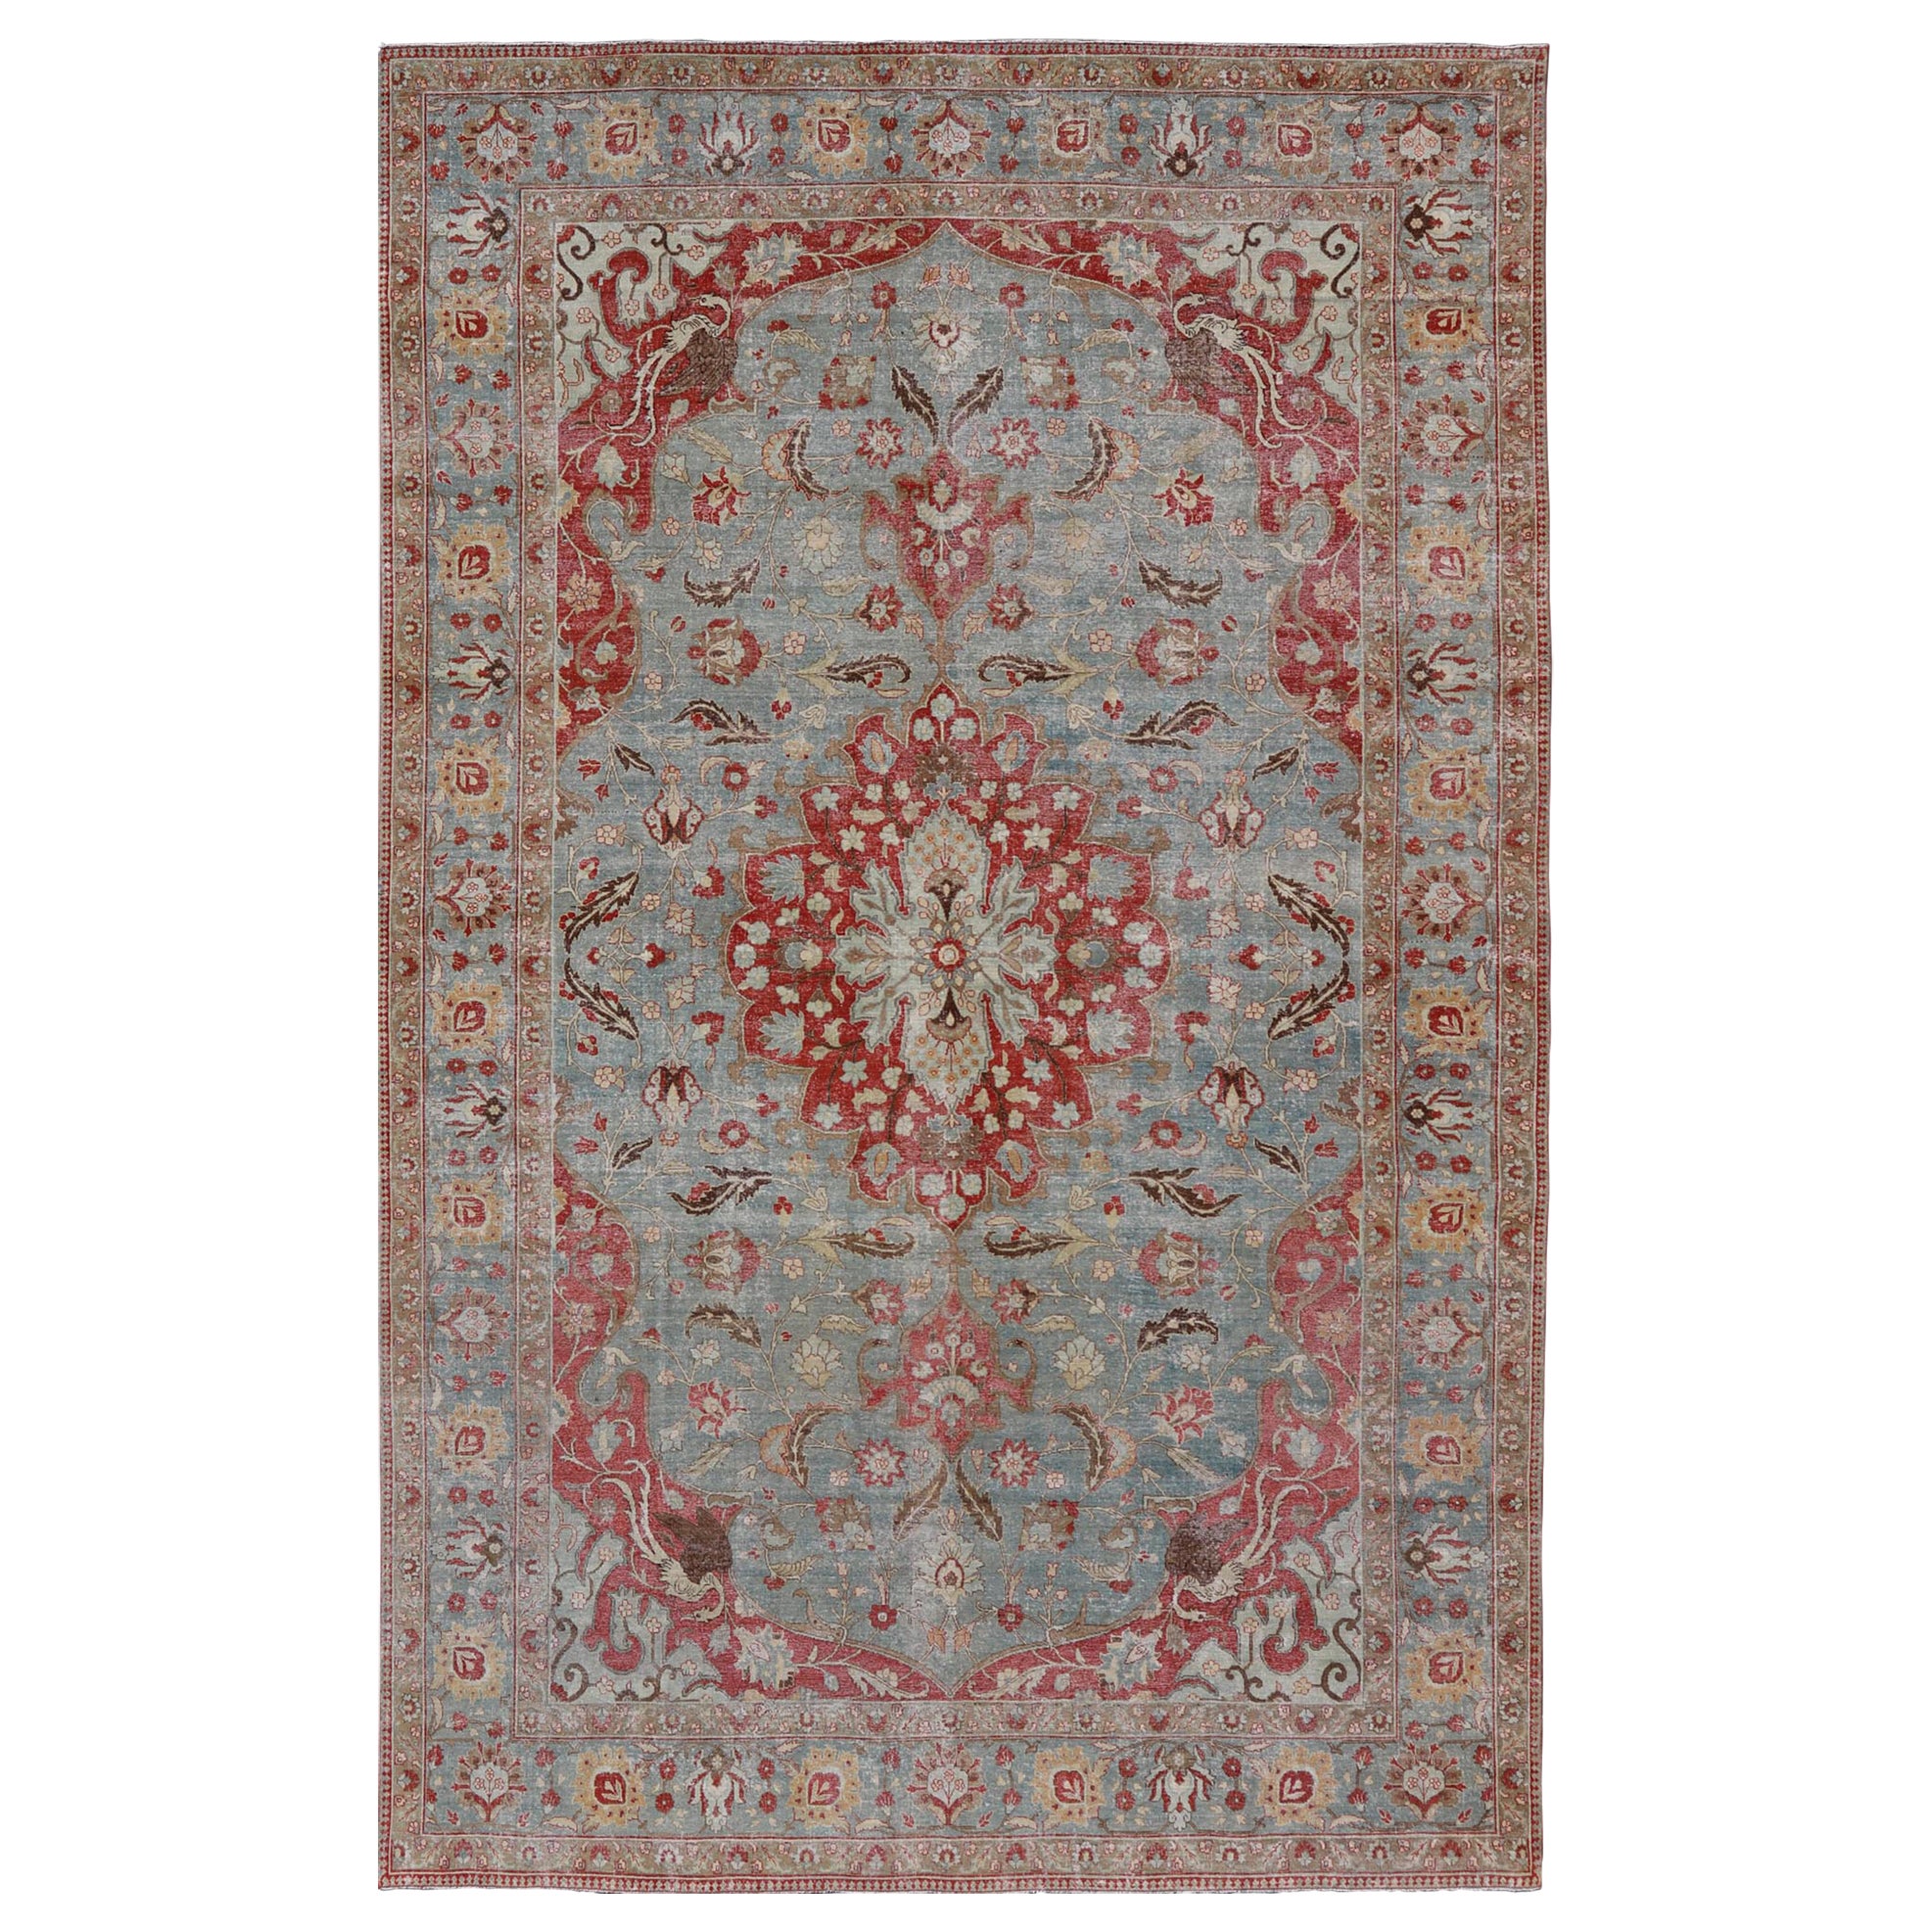 Large Antique Persian Tabriz Rug in Wool with Large Floral Medallion Design  For Sale